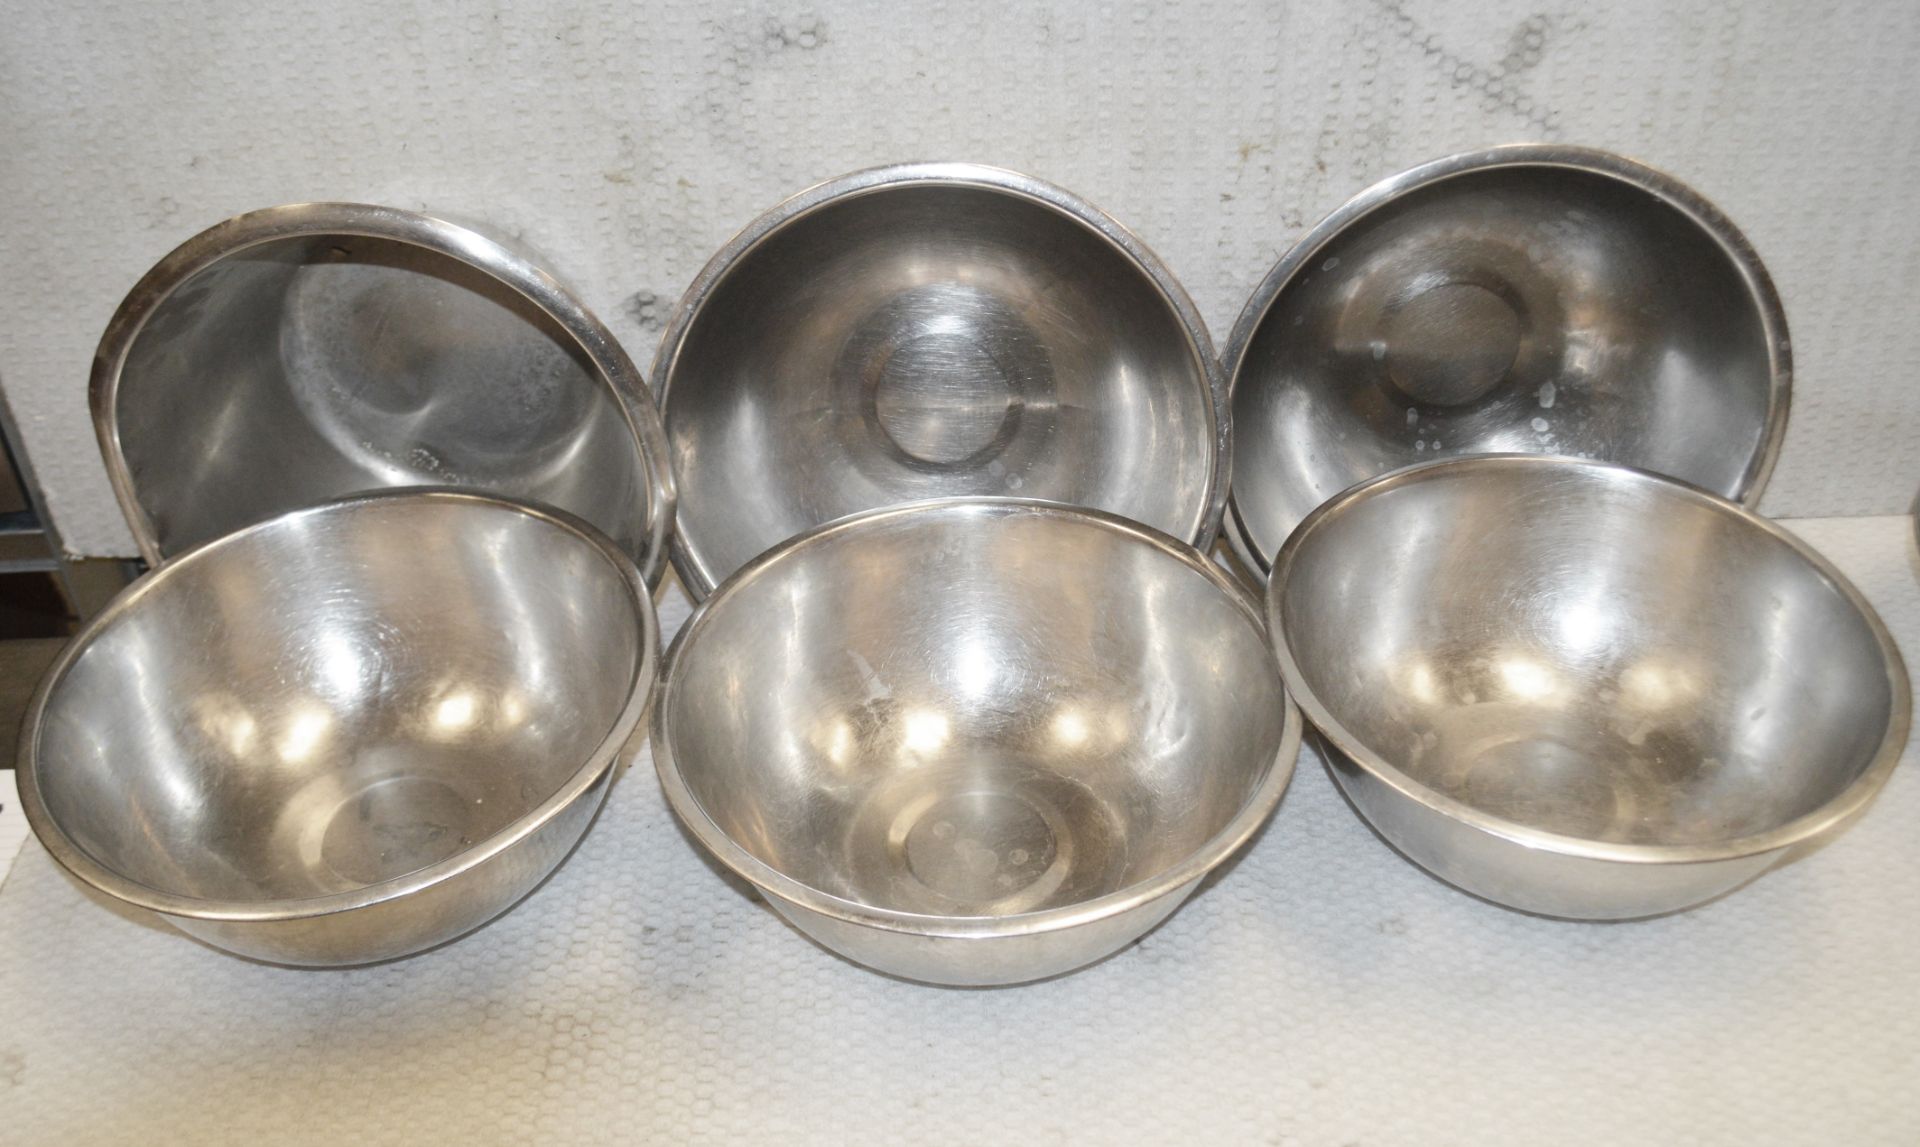 19 x Stainless Steel Mixing  Bowls For Commercial Kitchens - Includes Small, Medium and Large - Image 6 of 6